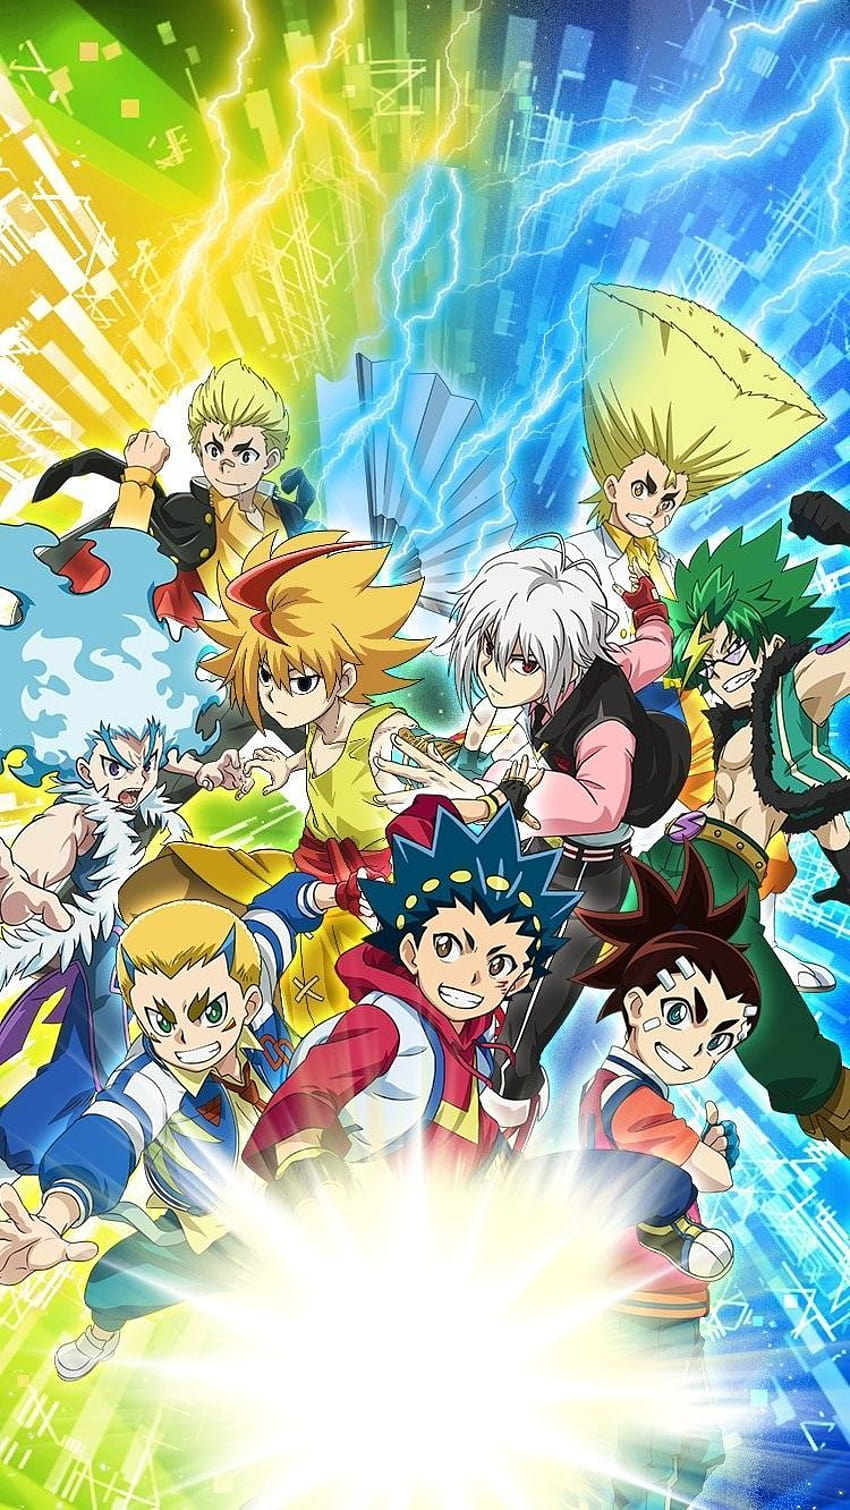 The poster with the 9 characters from the 4 seasons of Beyblade Burst who will appear in season 5/Sparking is now complete…, beyblade burst dynamite battle HD phone wallpaper